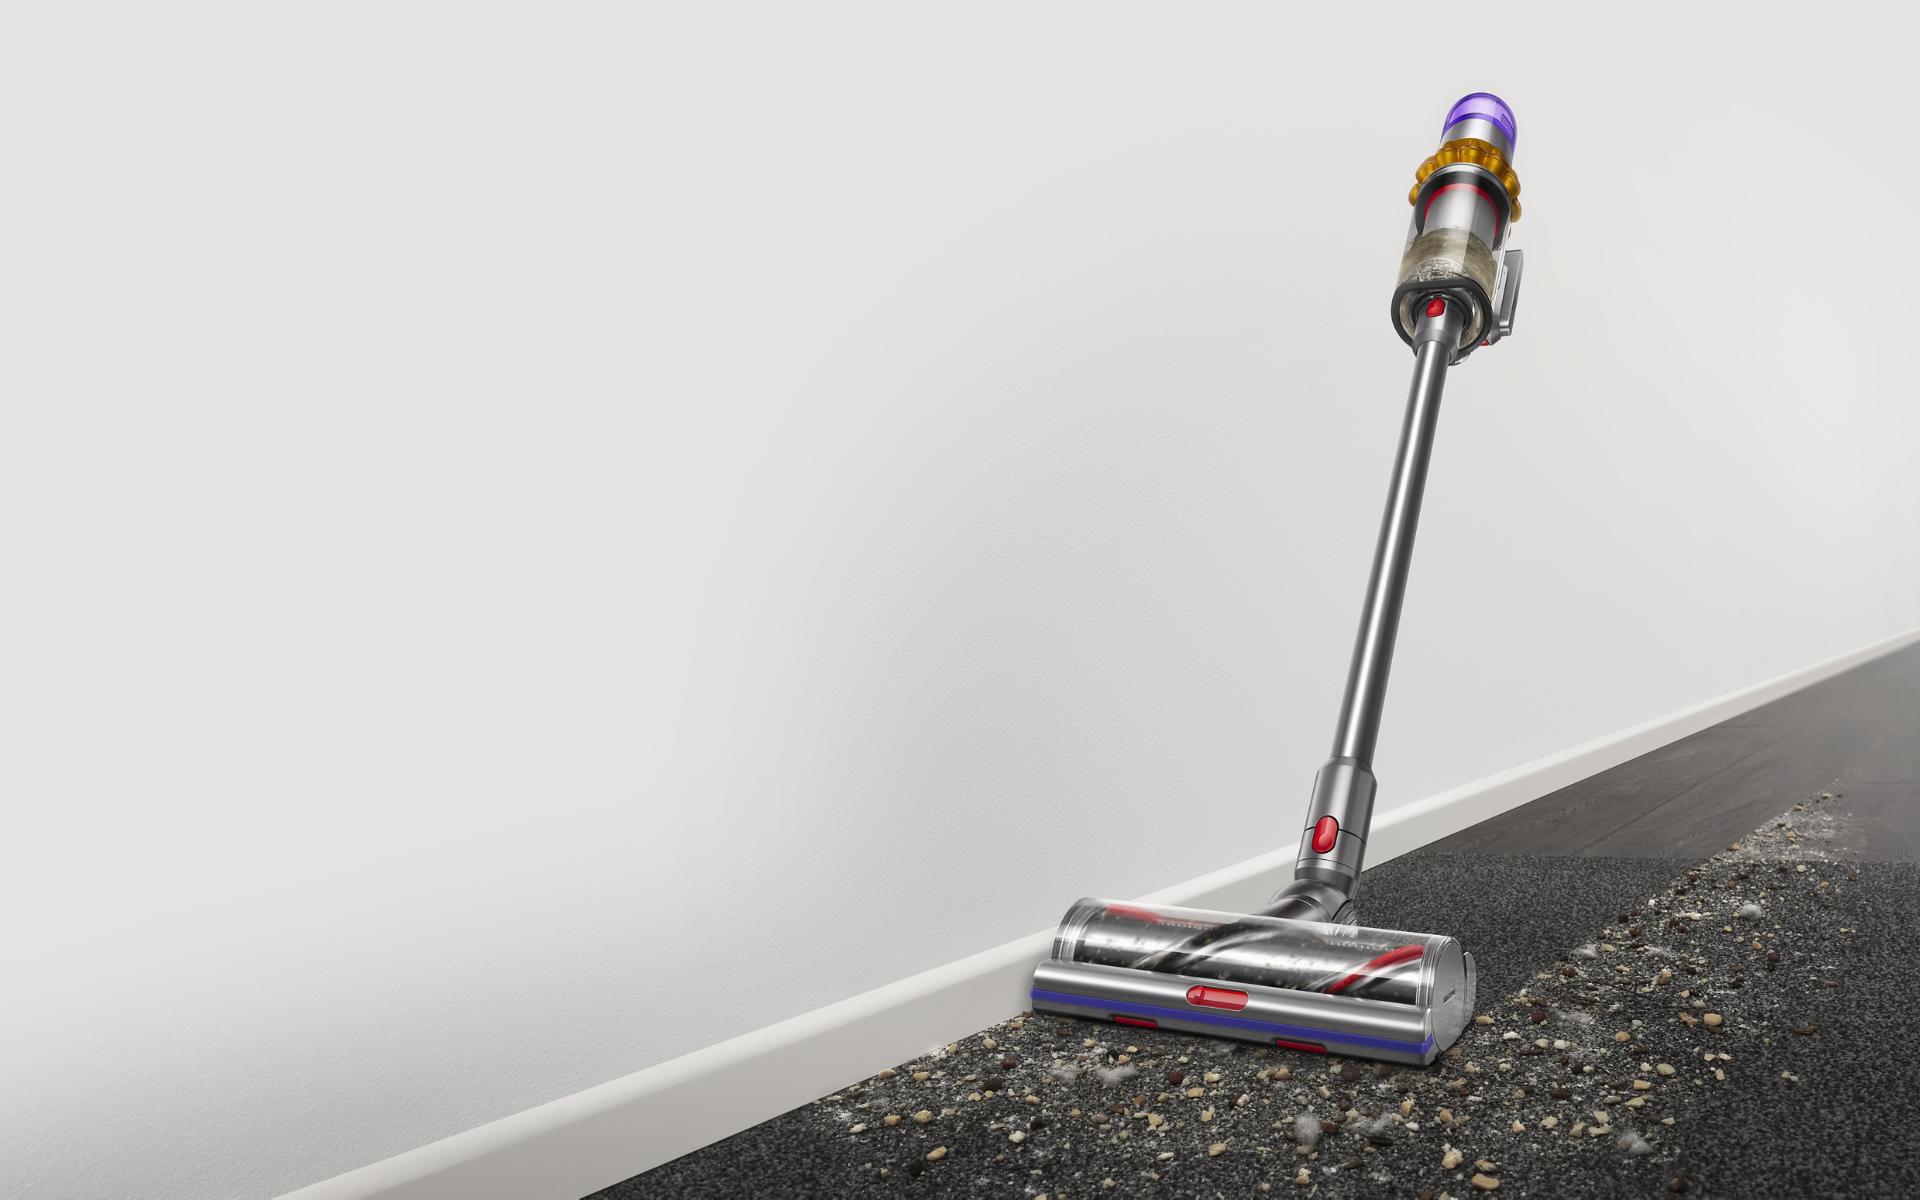 High Torque cleaner head with anti-tangle technology cleaning between hard floor and carpet